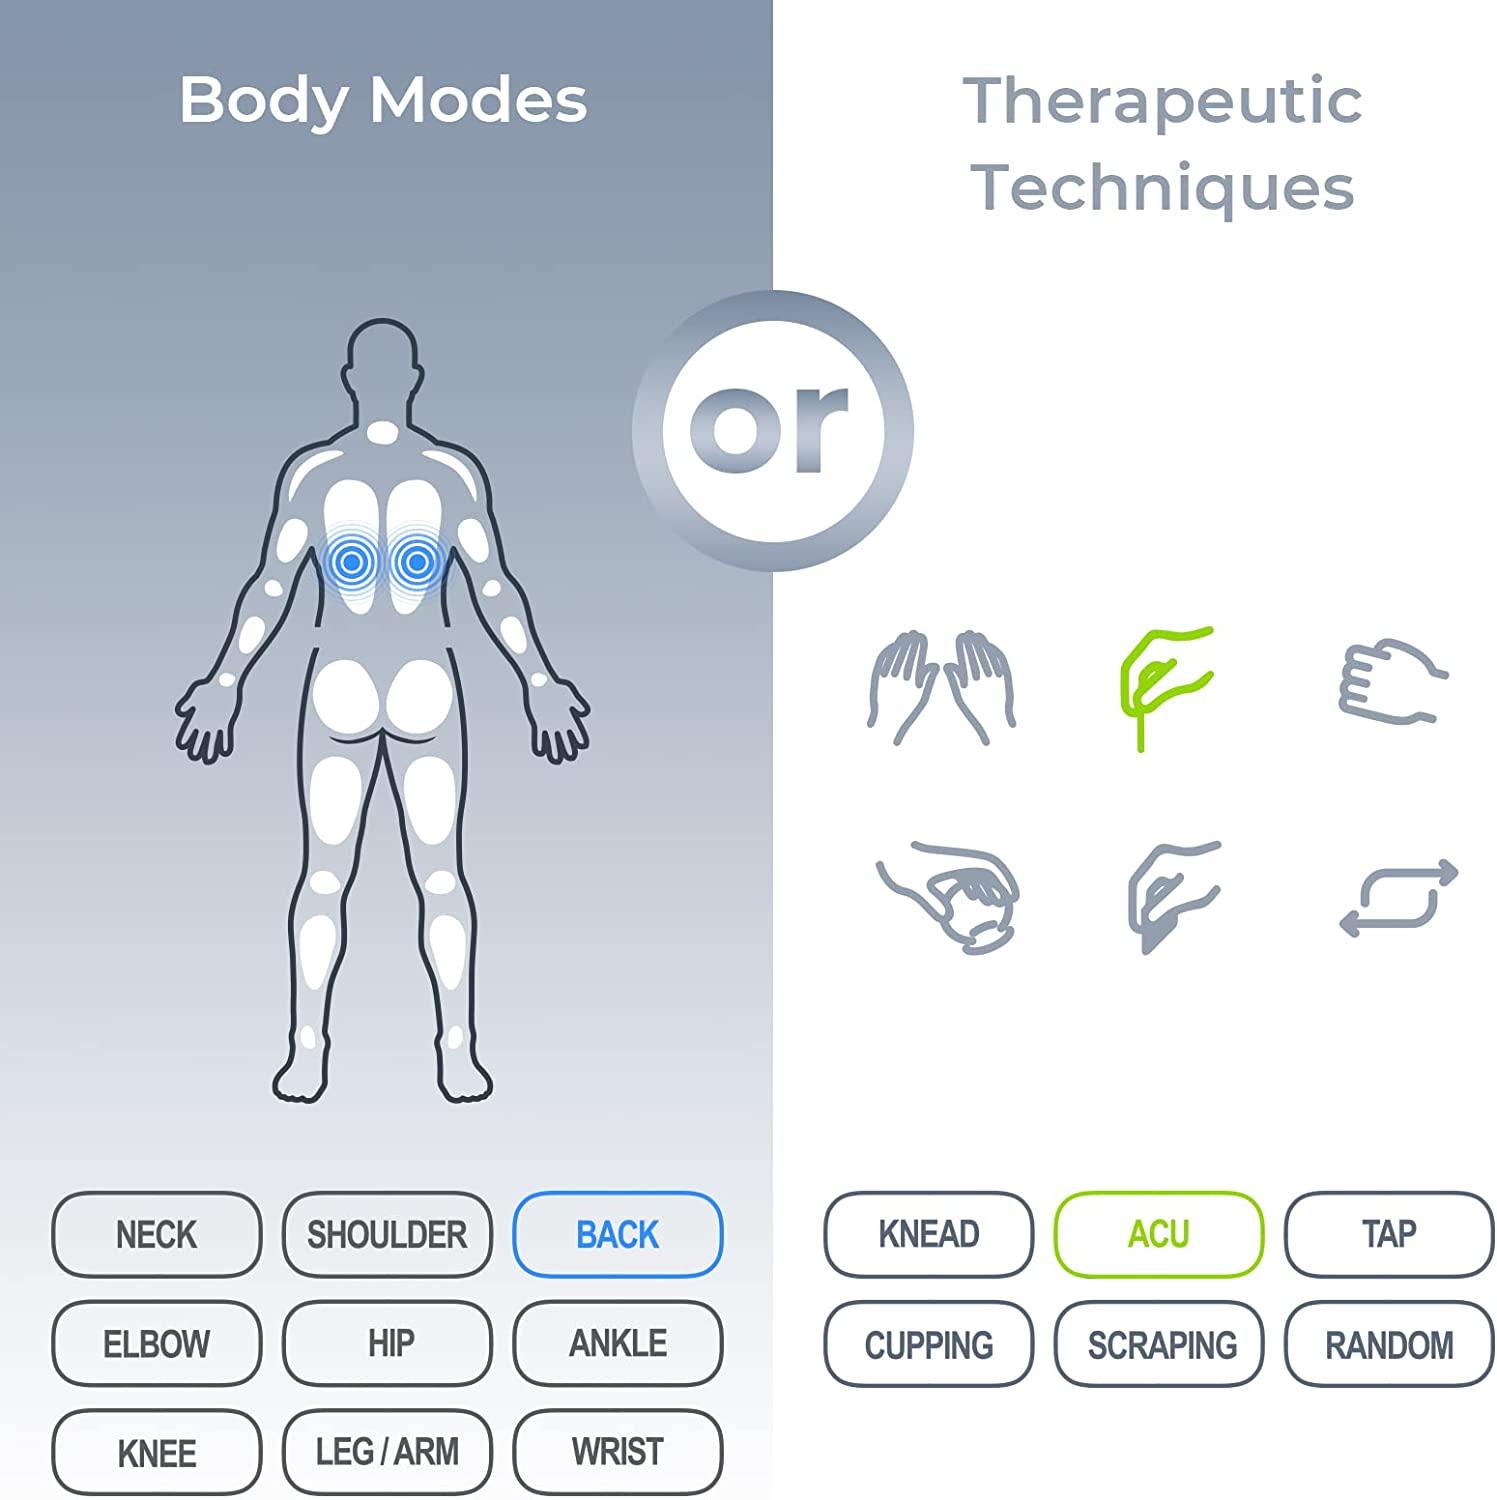 AUVON TENS Unit Muscle Stimulator With 24 User-friendly Modes for